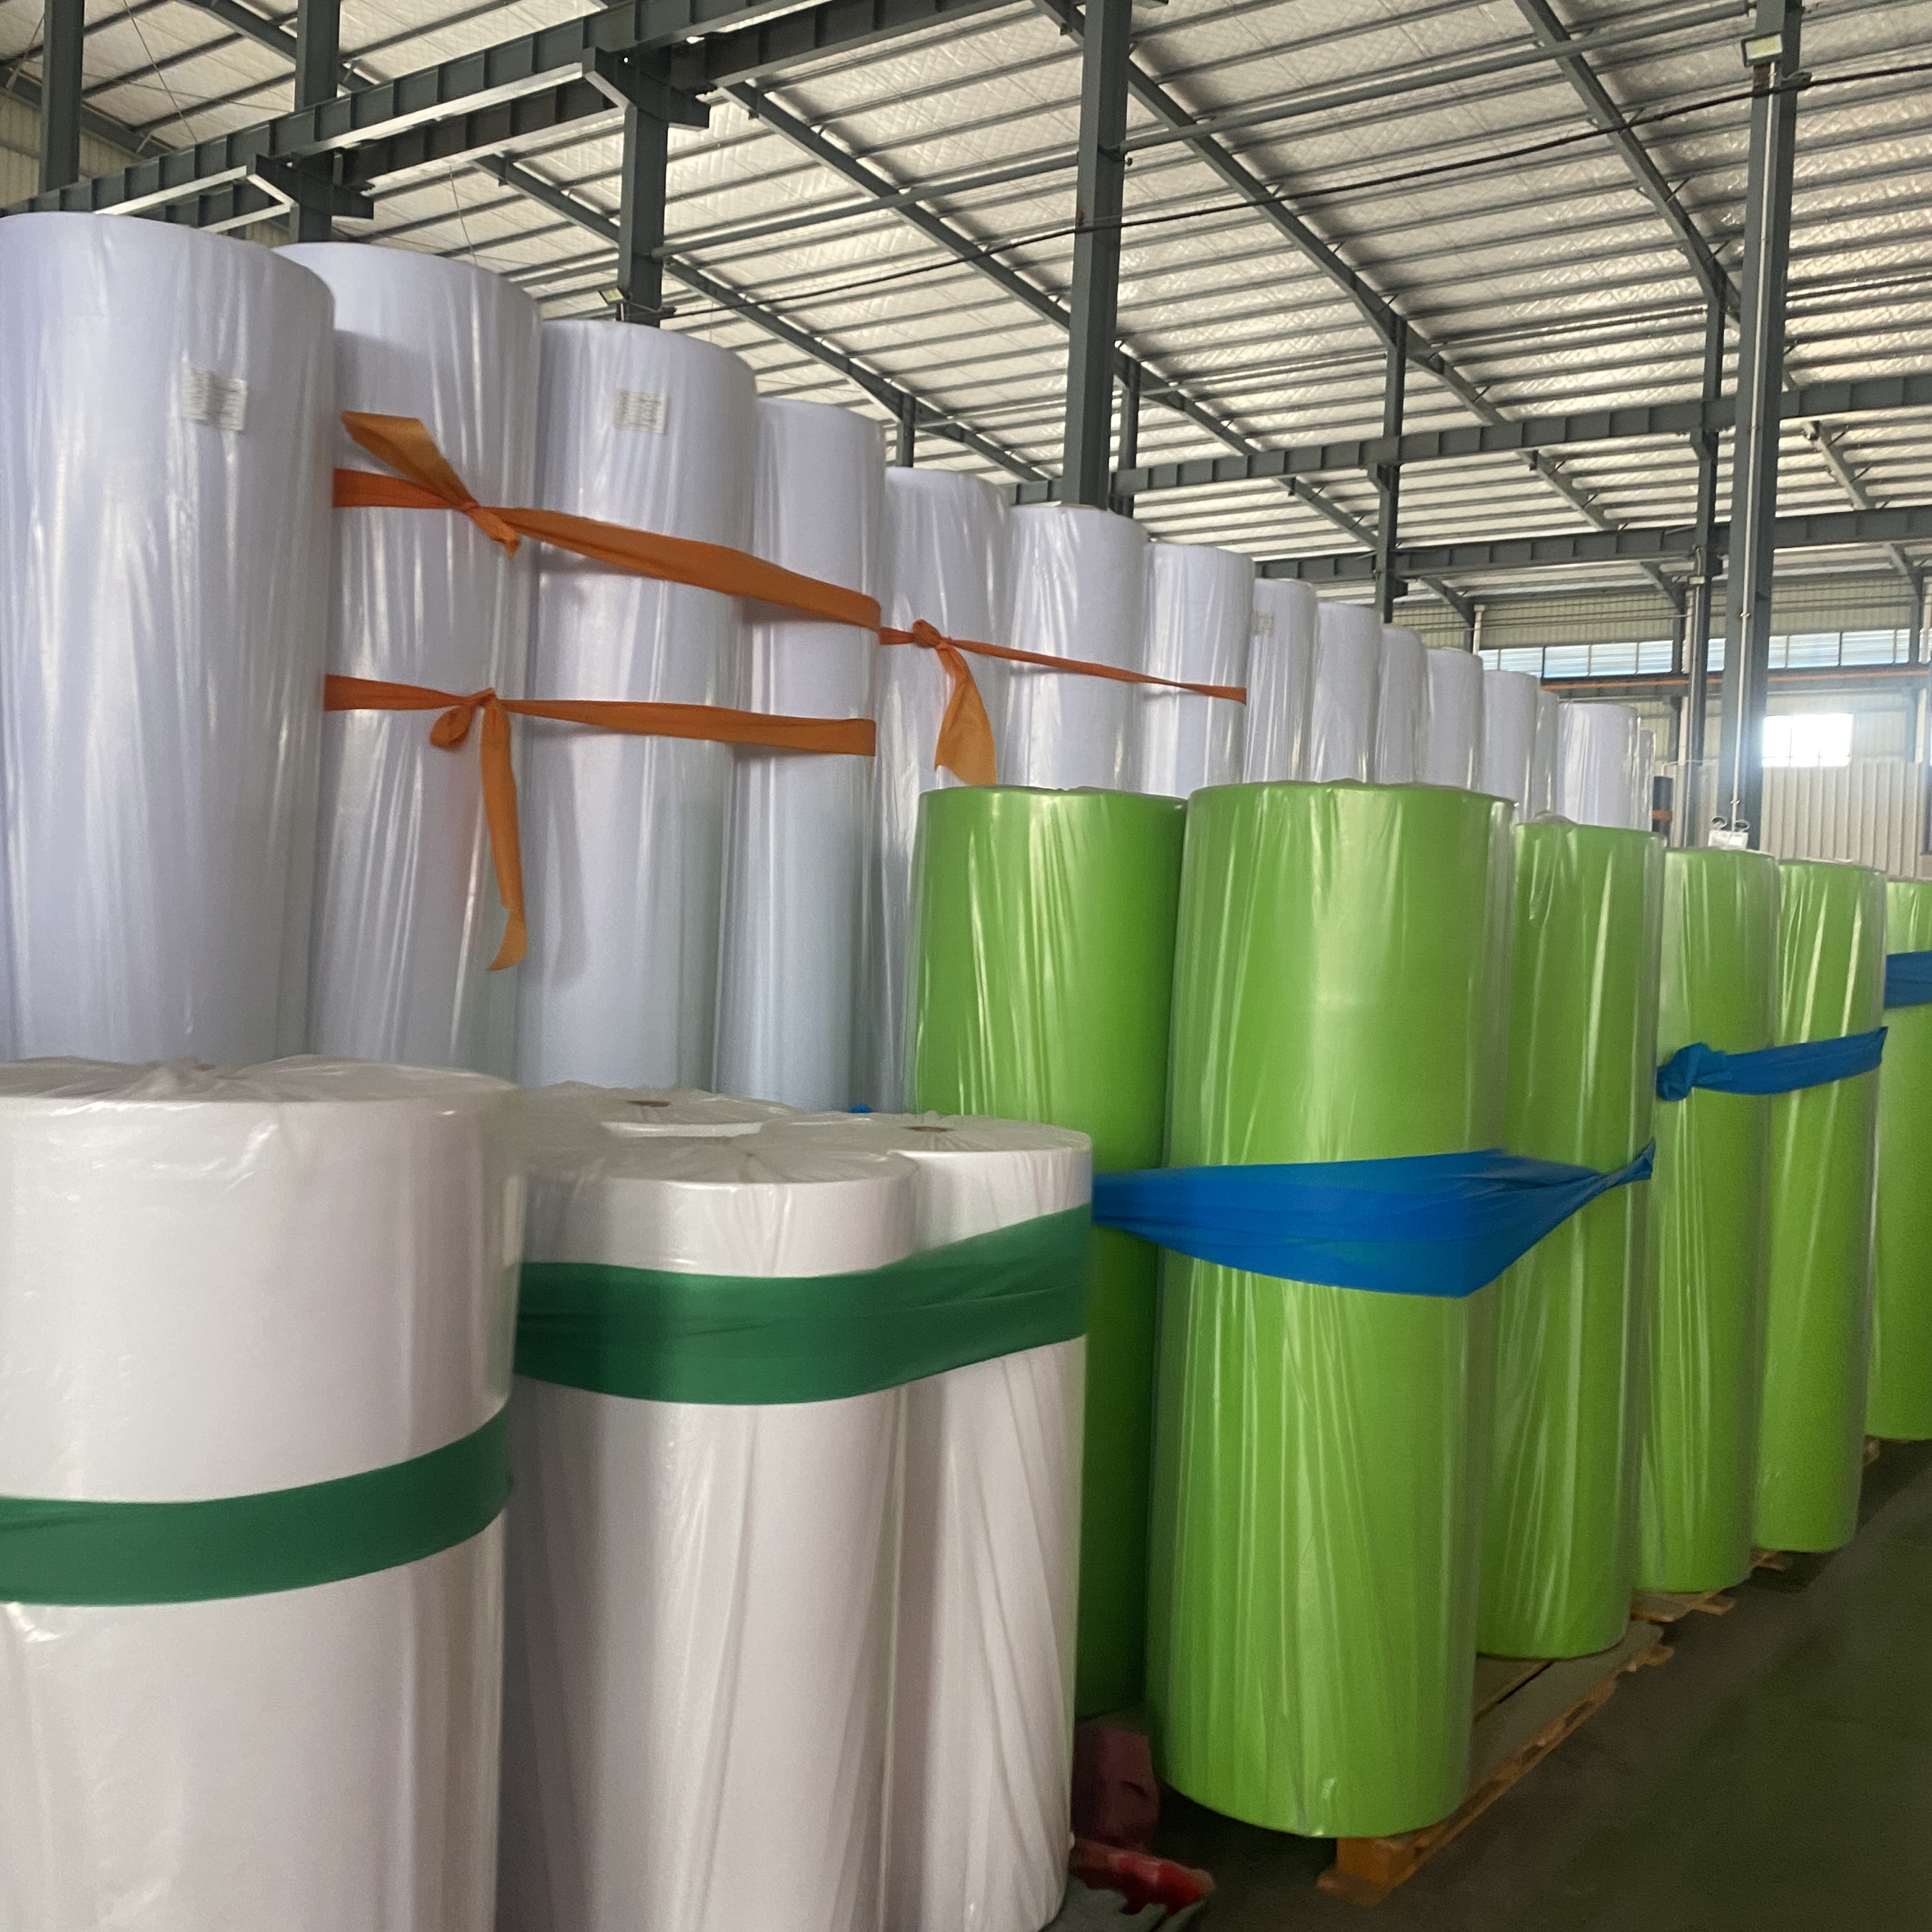 Disposable Nonwoven Bedsheet 100% PP Nonwoven Fabric pre-cut Bed Sheet